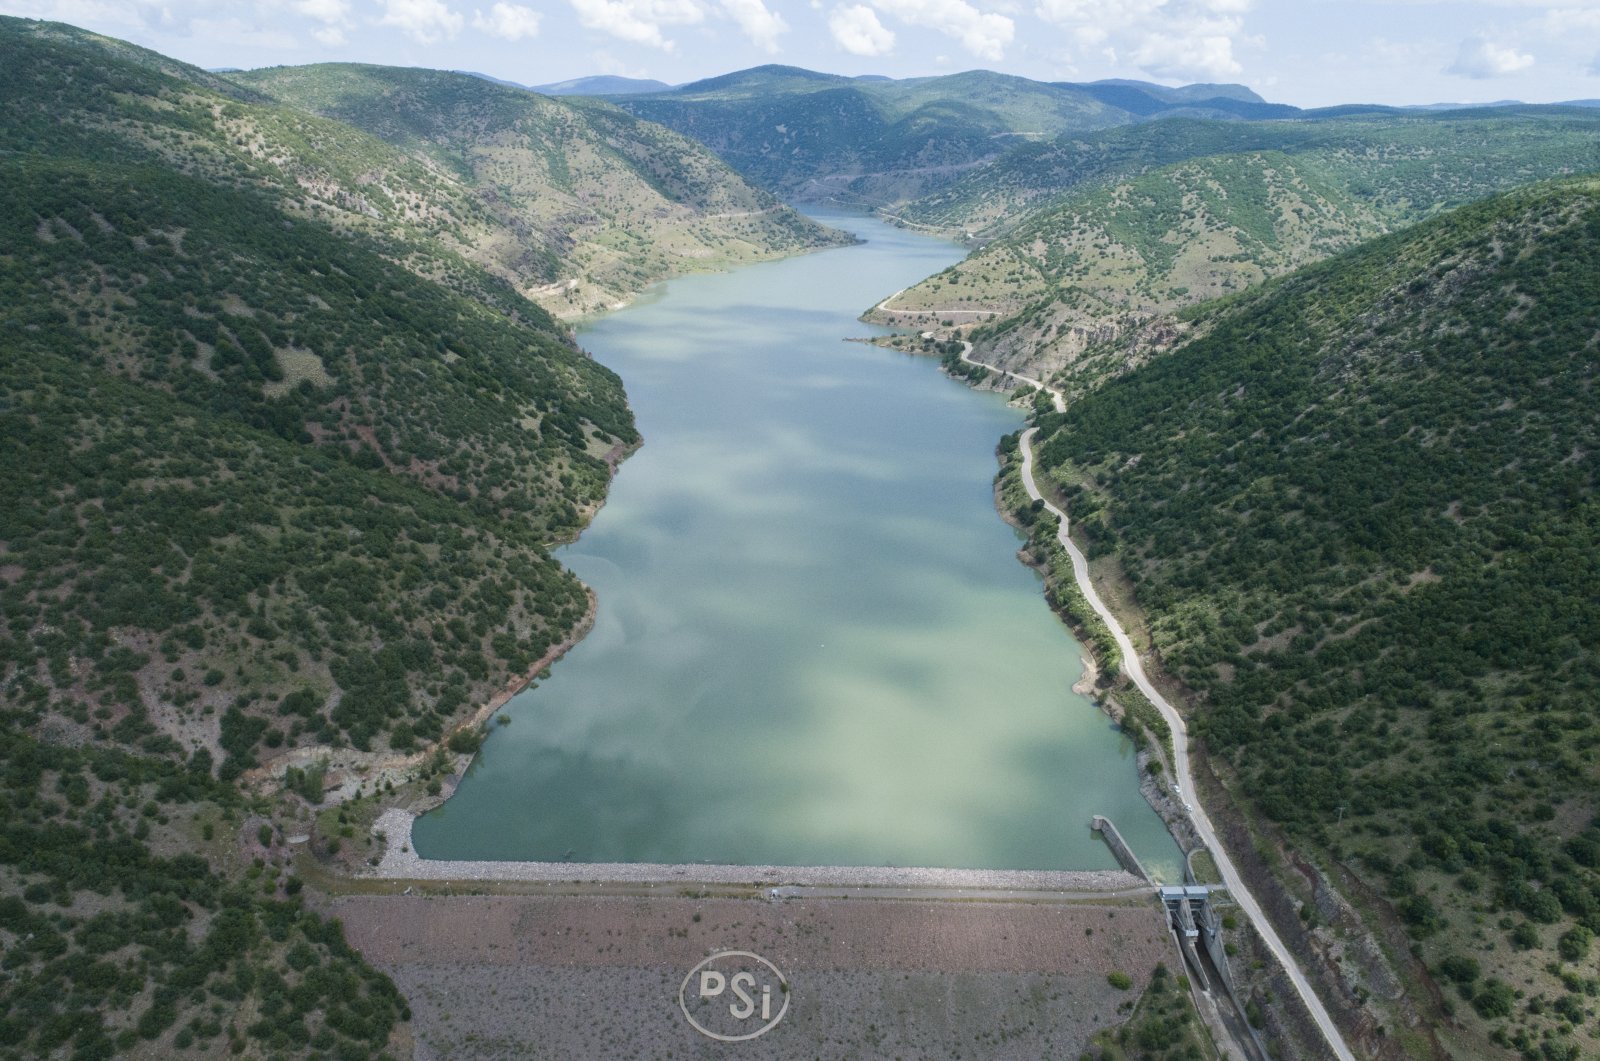 According to Pakdemirli, water levels in Istanbul's dams are currently enough to supply the city for seven months without any rainfall. (AA Photo)